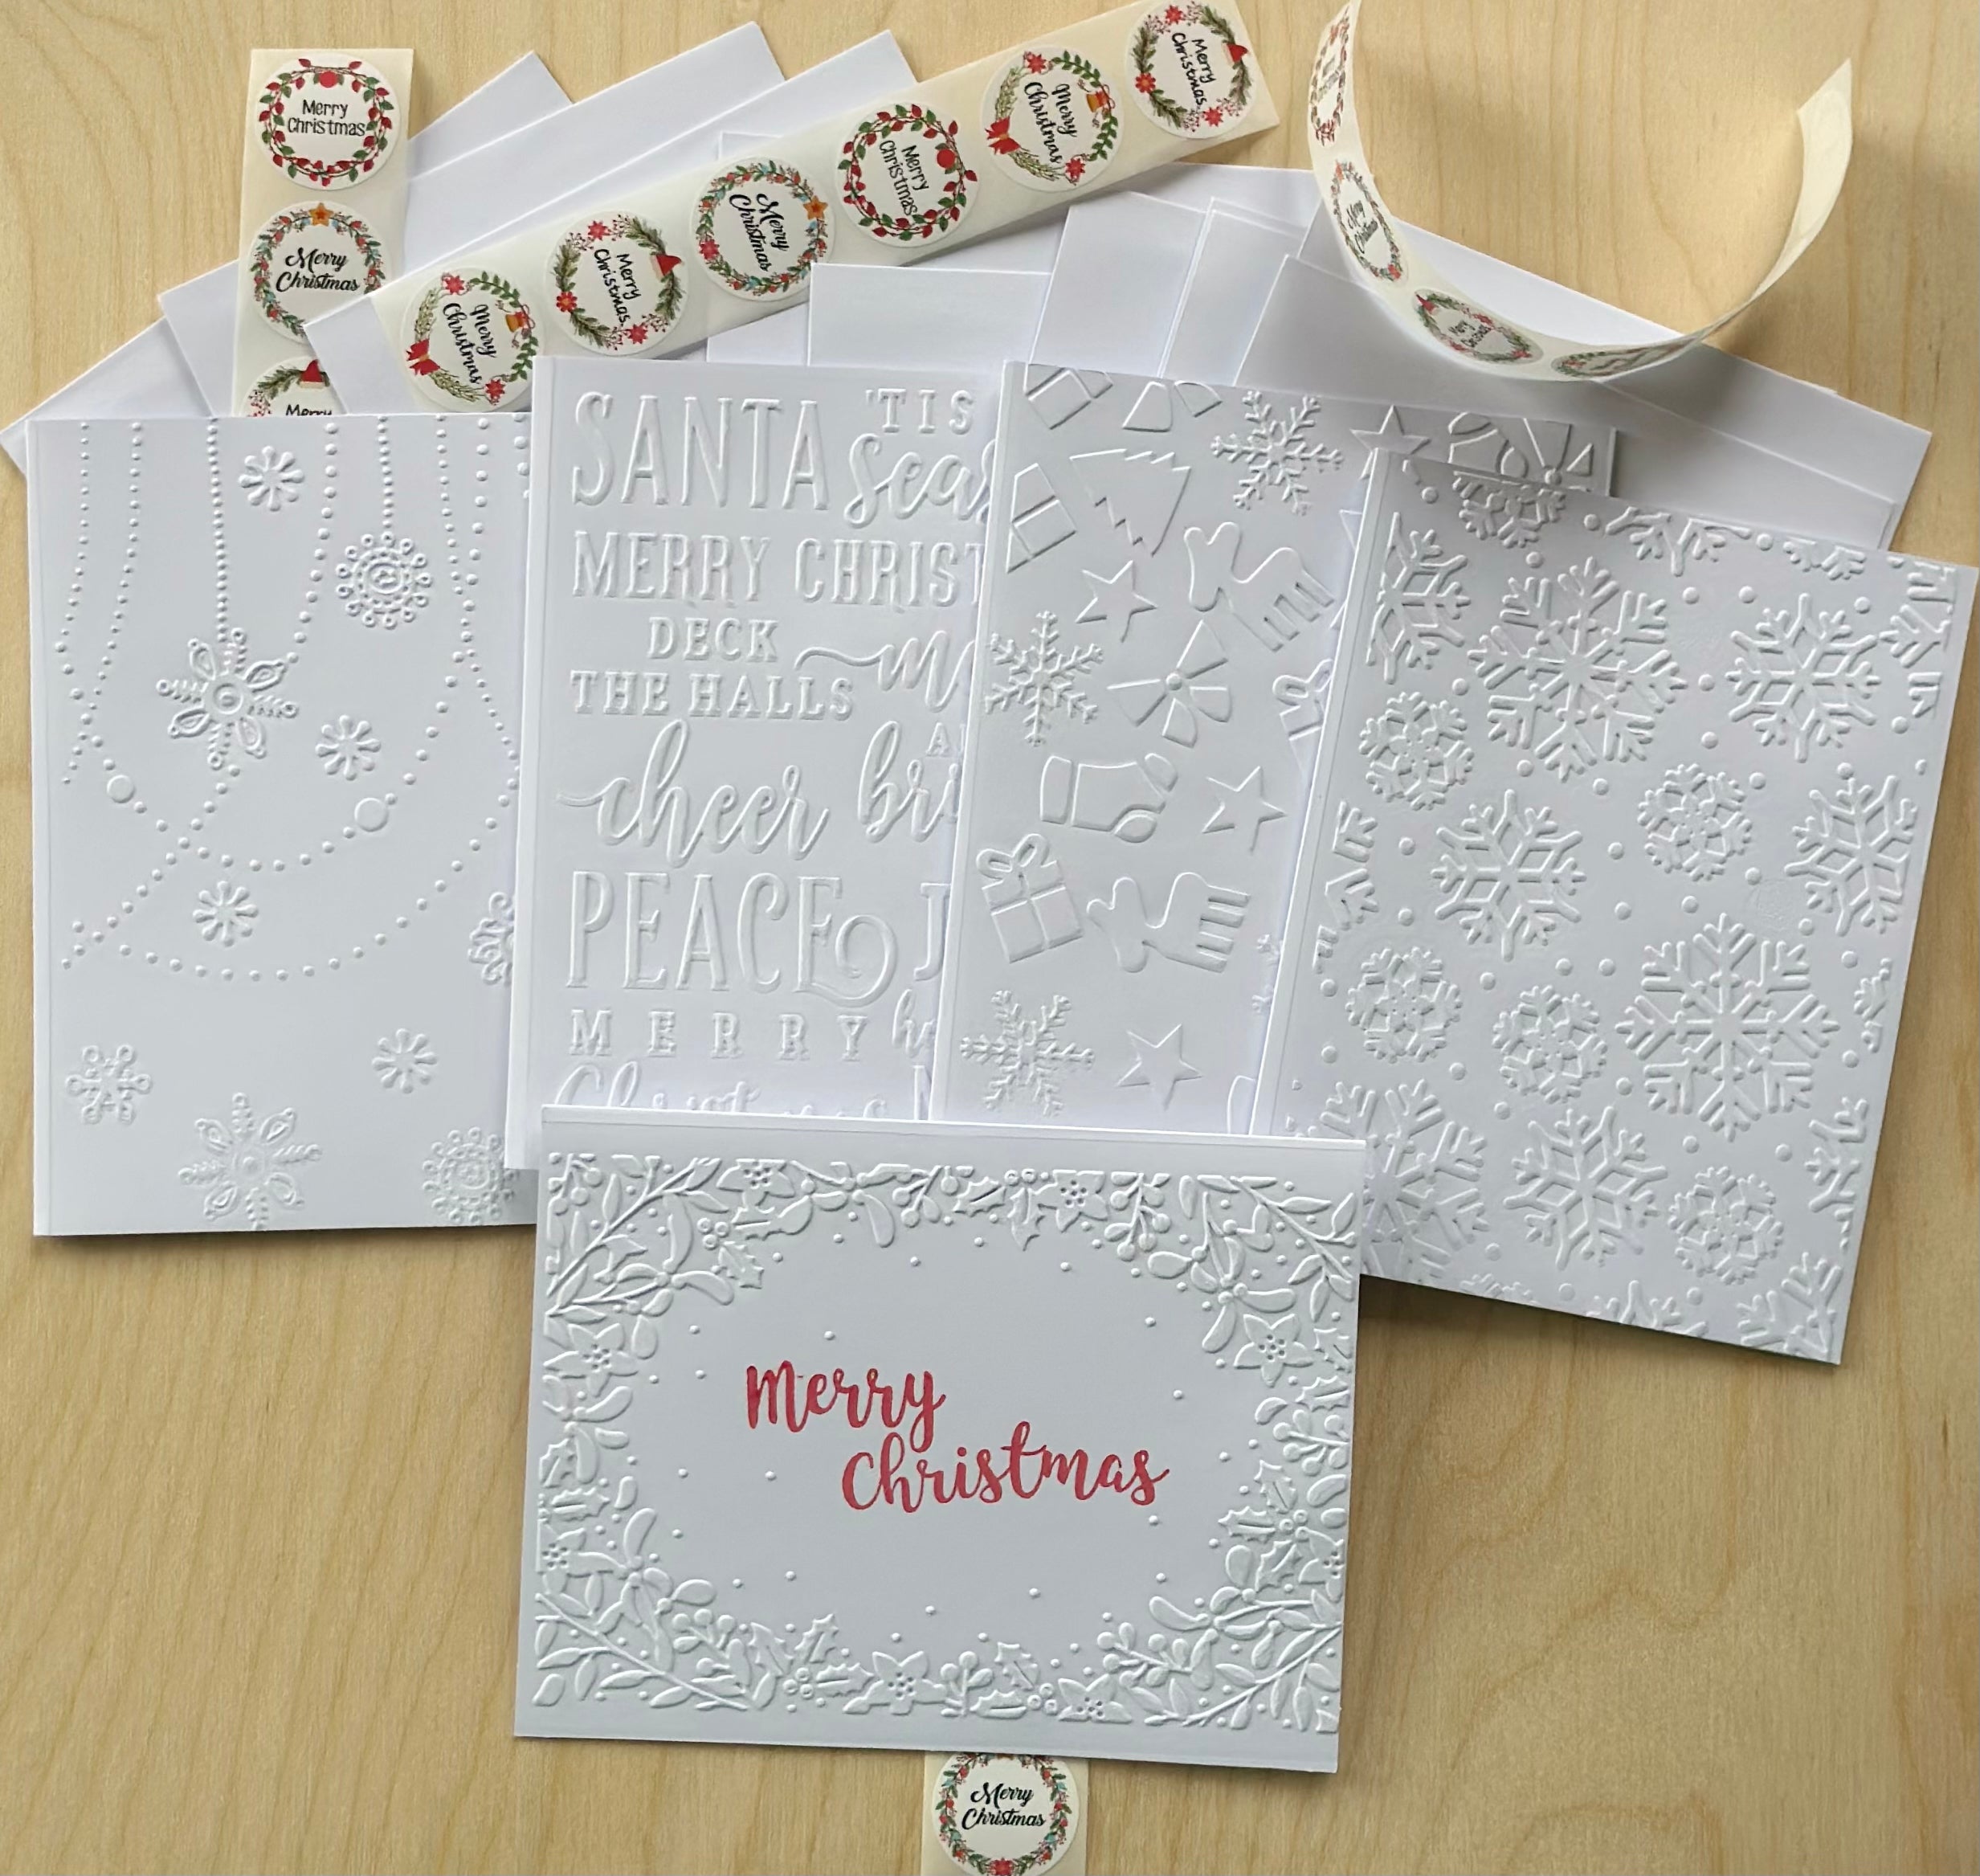 Christmas Cards | Embossed Christmas Cards | Blank Christmas Cards | Greeting Cards | Holiday Cards | Handmade Cards Sets | Cards Sets